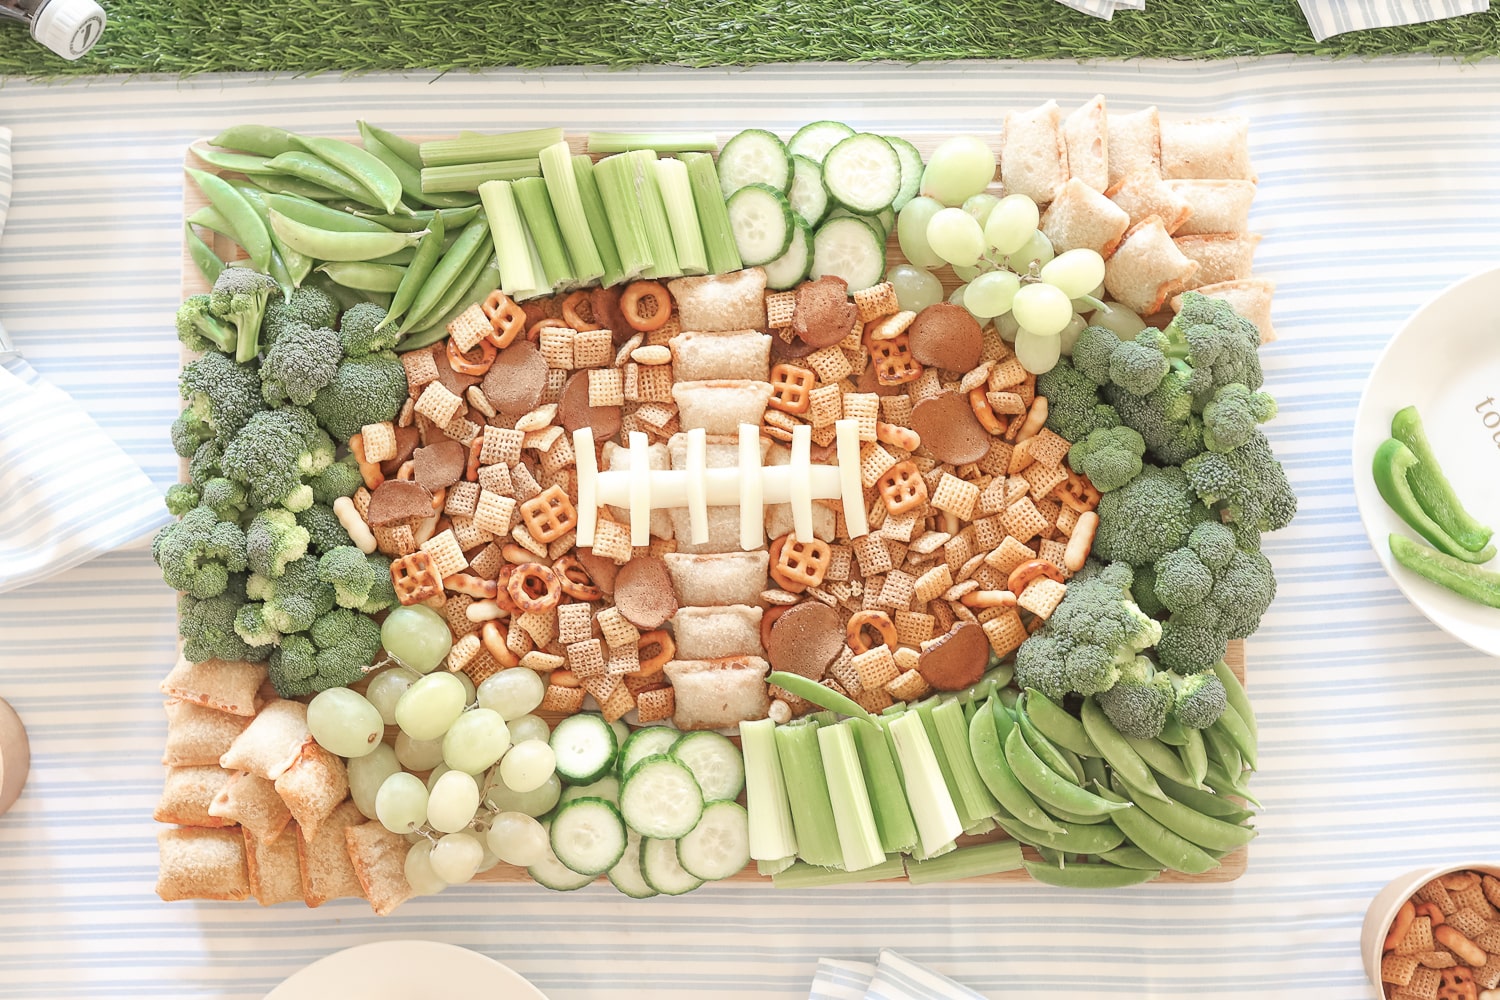 Football snack board created by blogger Stephanie Ziajka using green grapes, green veggies, Chex Mix, and Totino's Pizza Rolls on Diary of a Debutante